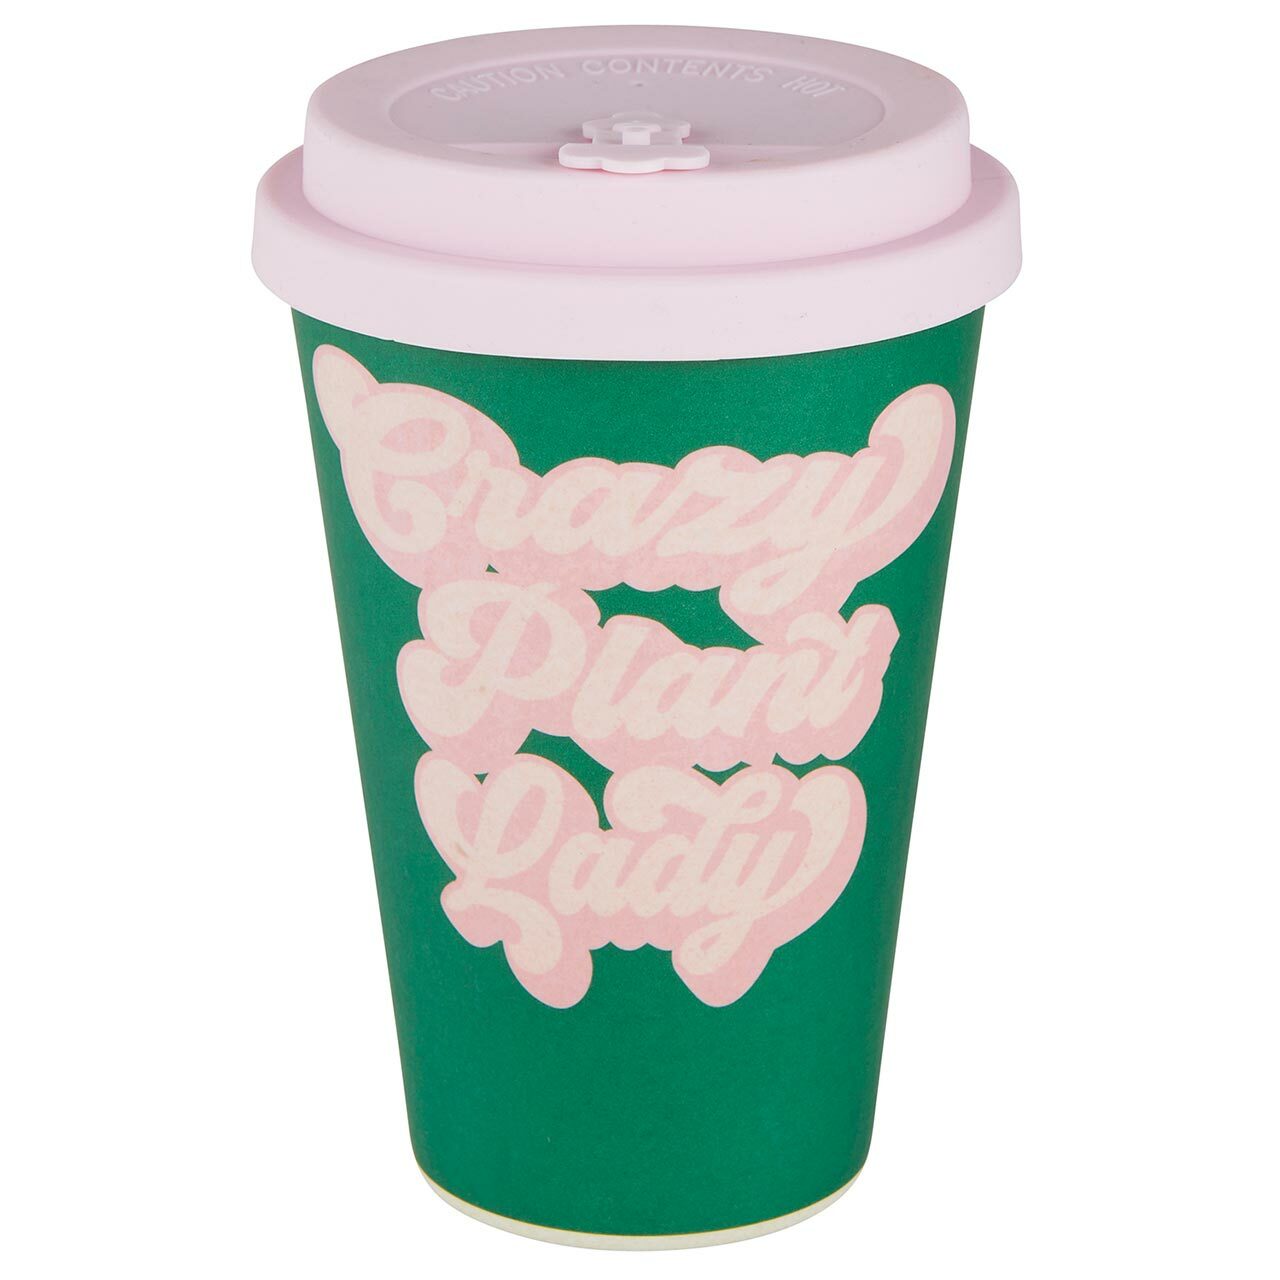 Personalized Styrofoam Cups - Crazy About Cups